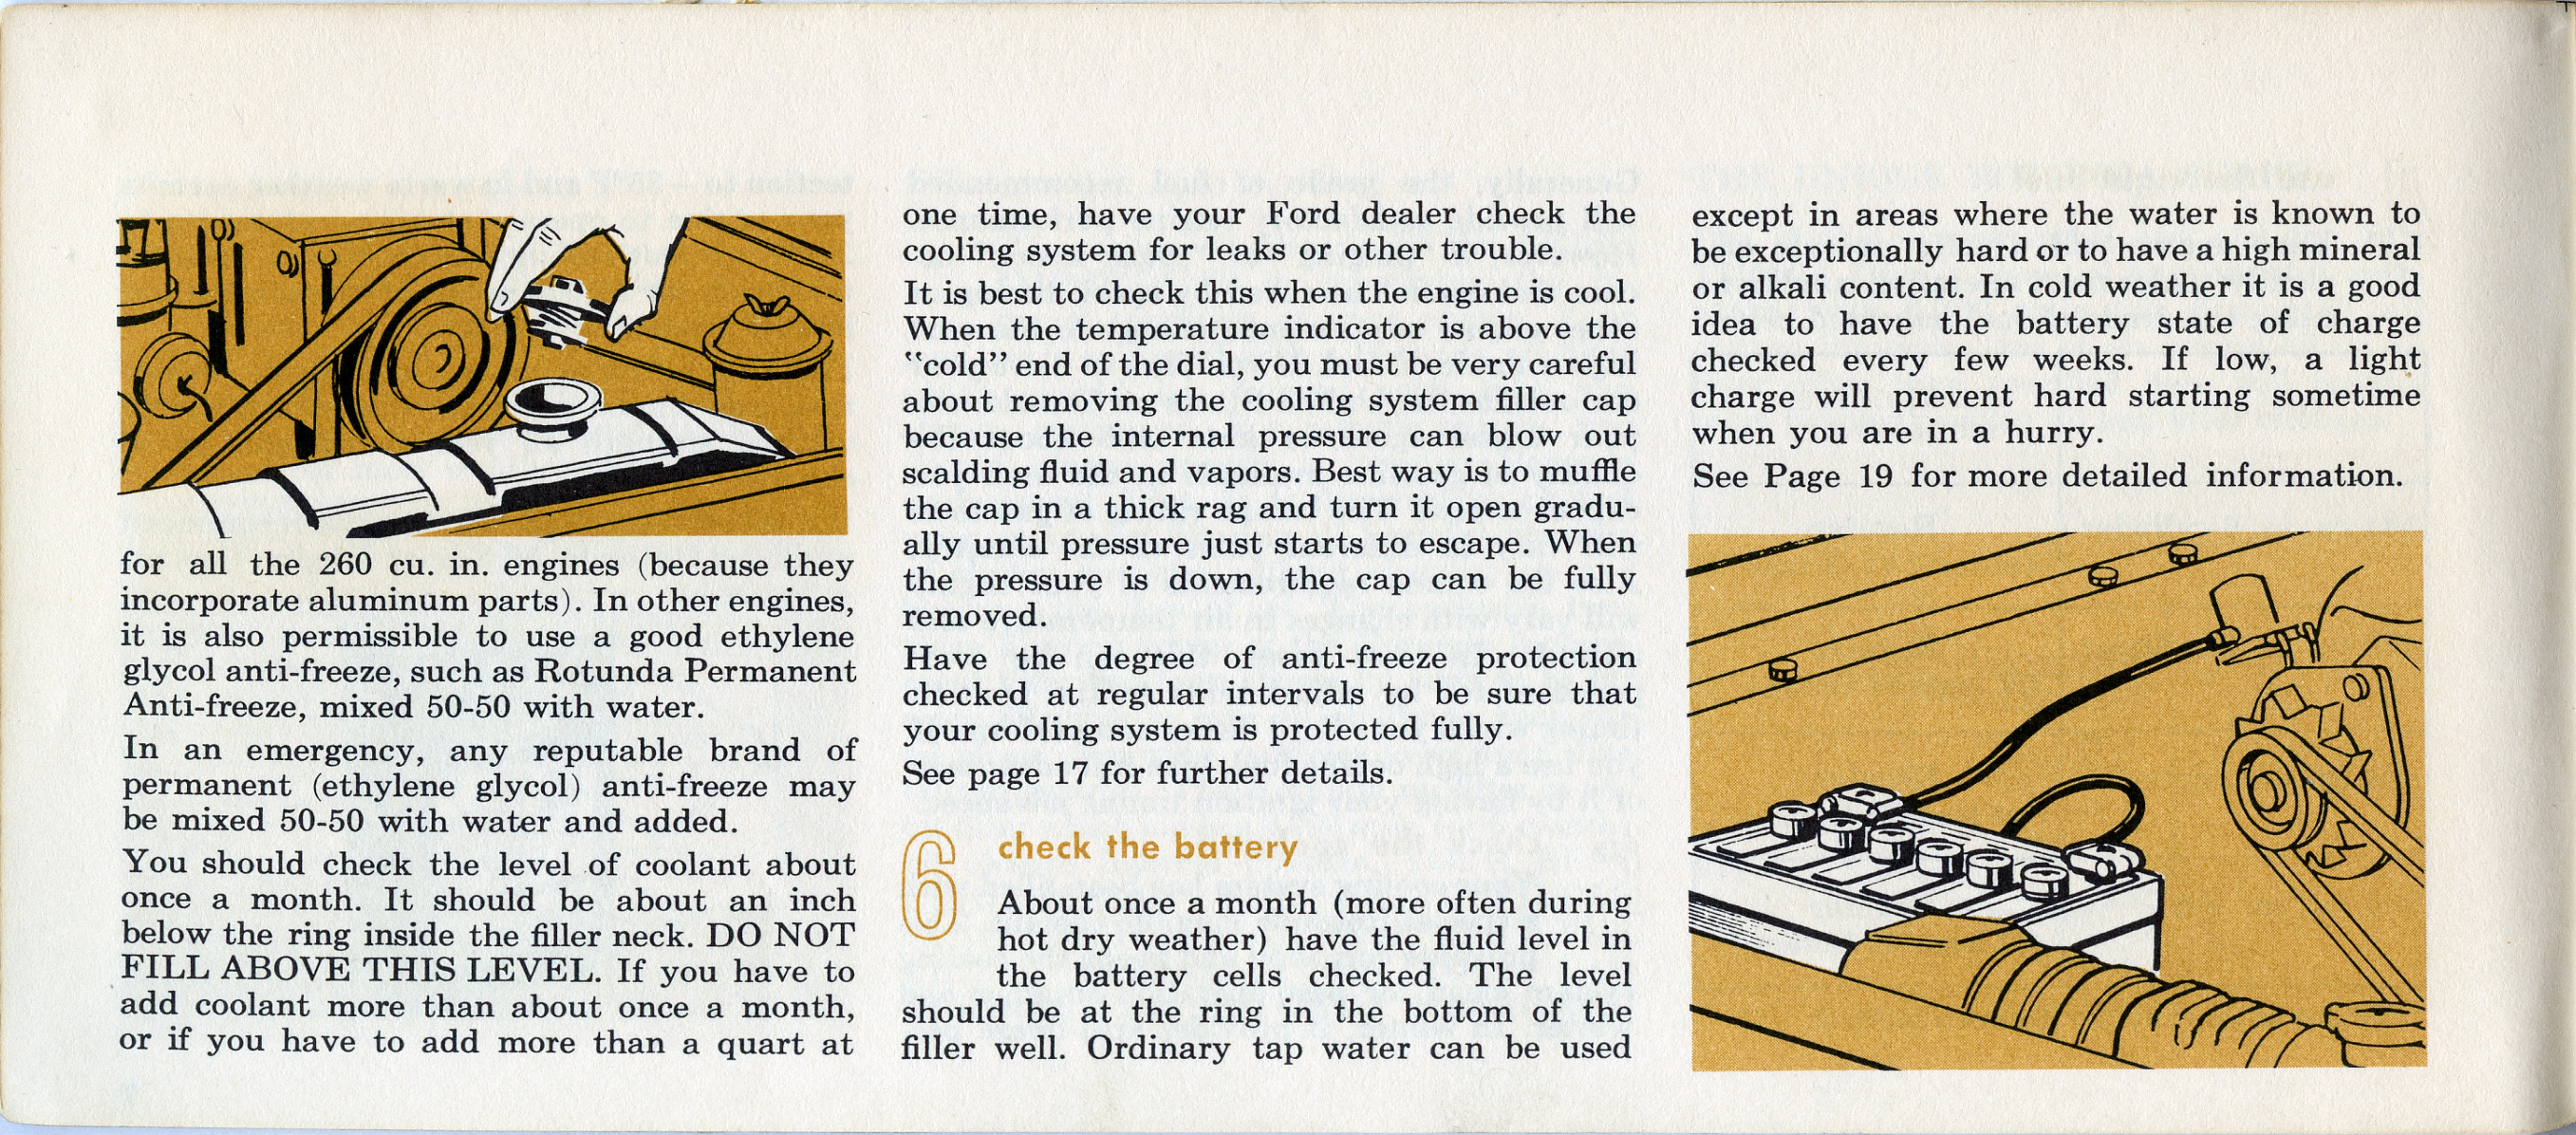 1964 Ford Falcon Owners Manual Page 52